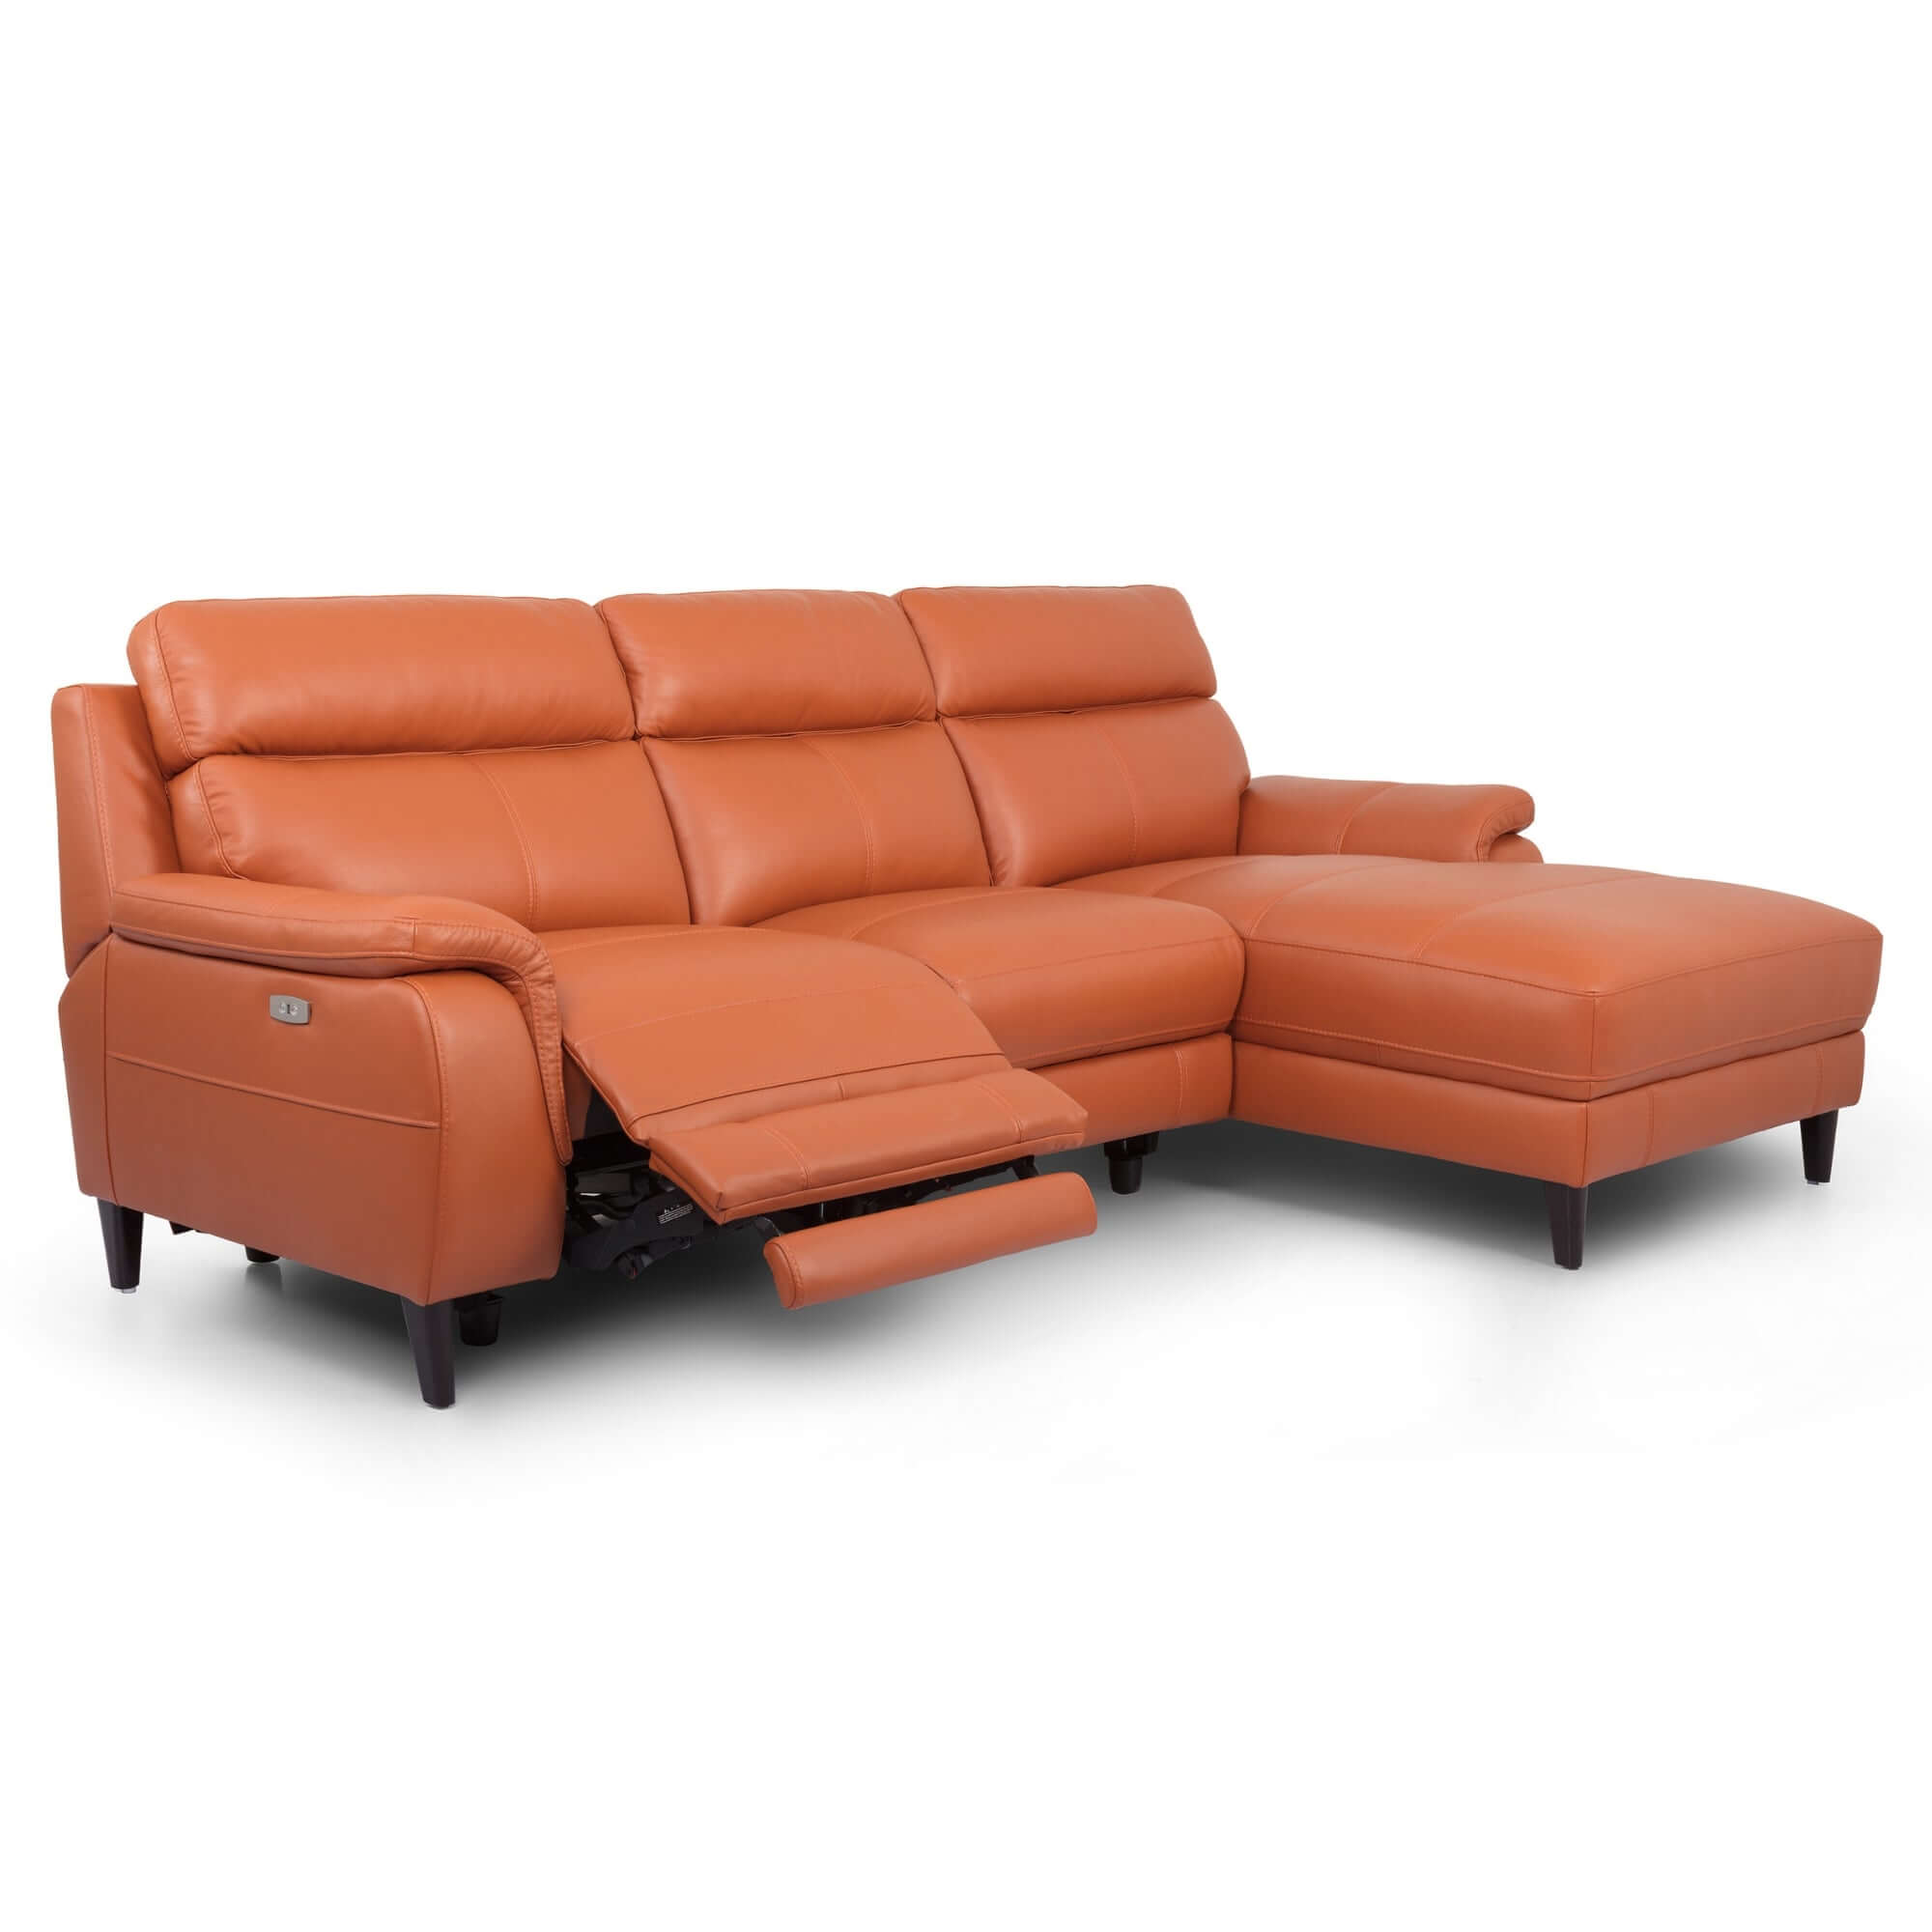 Ella Leather Sofa Recliner with Chaise - Modern Tan Lounge-Upinteriors